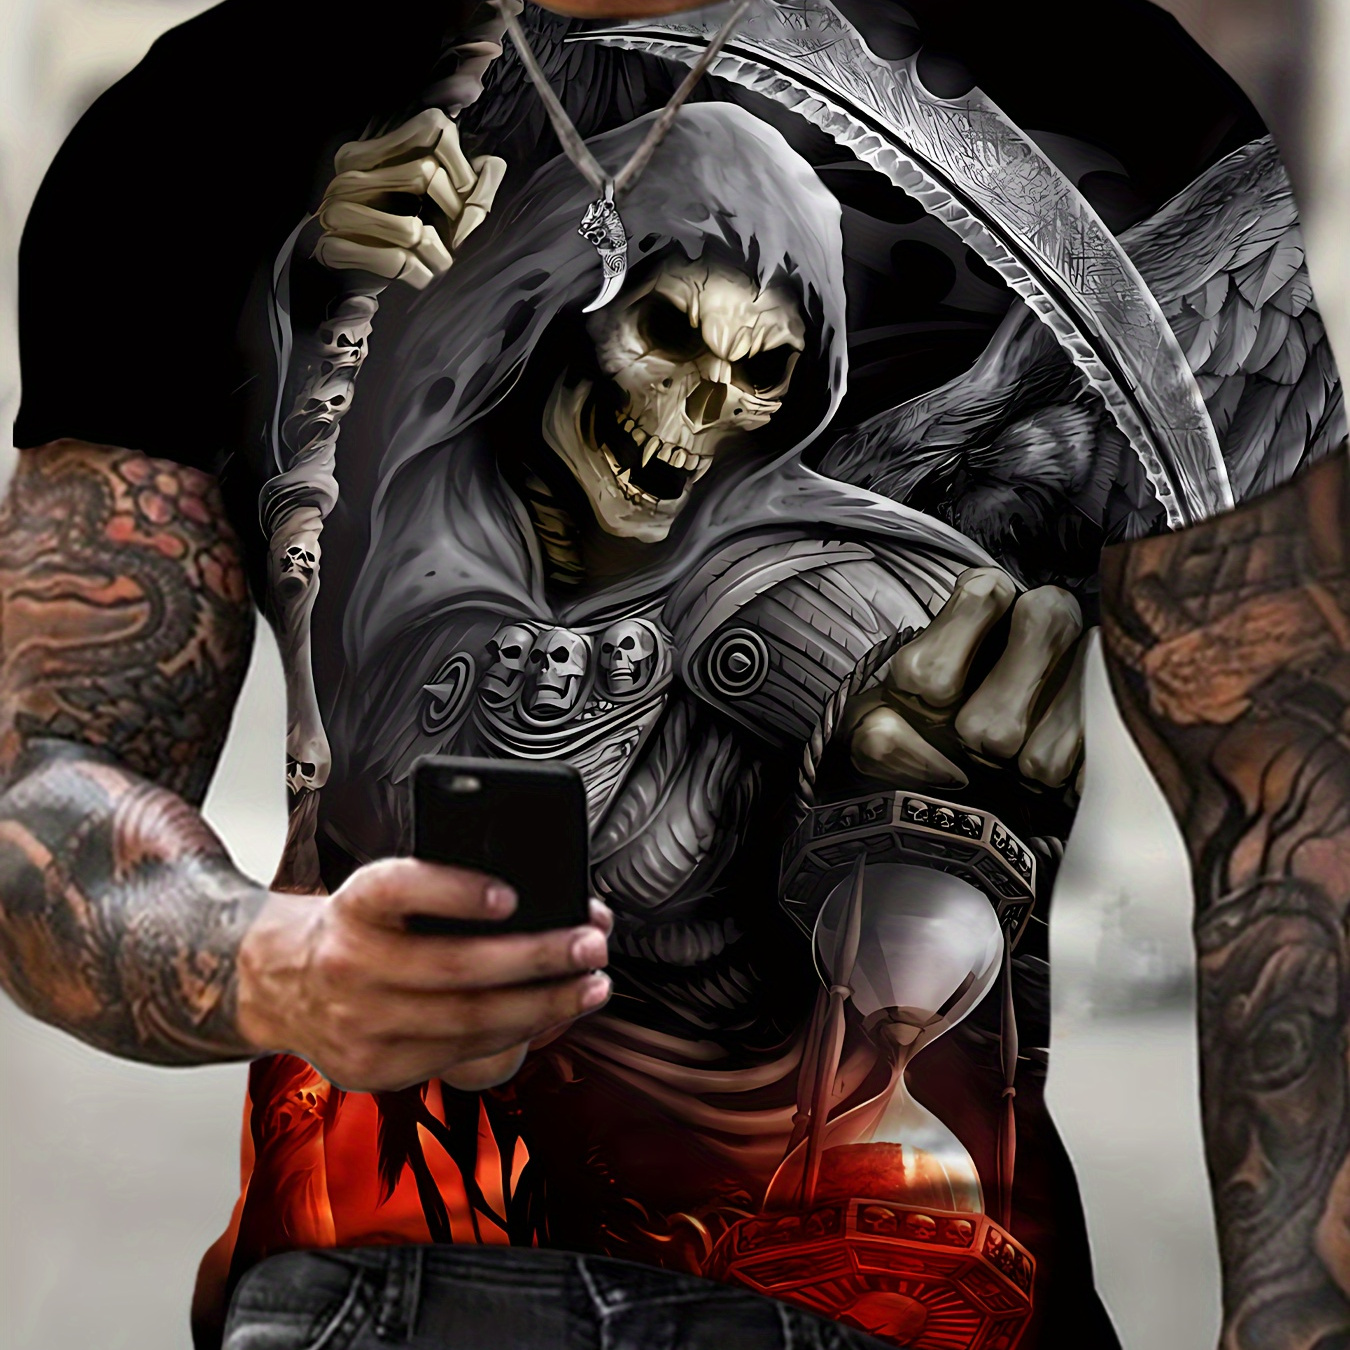 

Plus Size T-shirt For Men, Roaring Skeleton Graphic Print Short Sleeve Tees For Big & Tall Males, Summer Stylish Outdoor Sports Tops